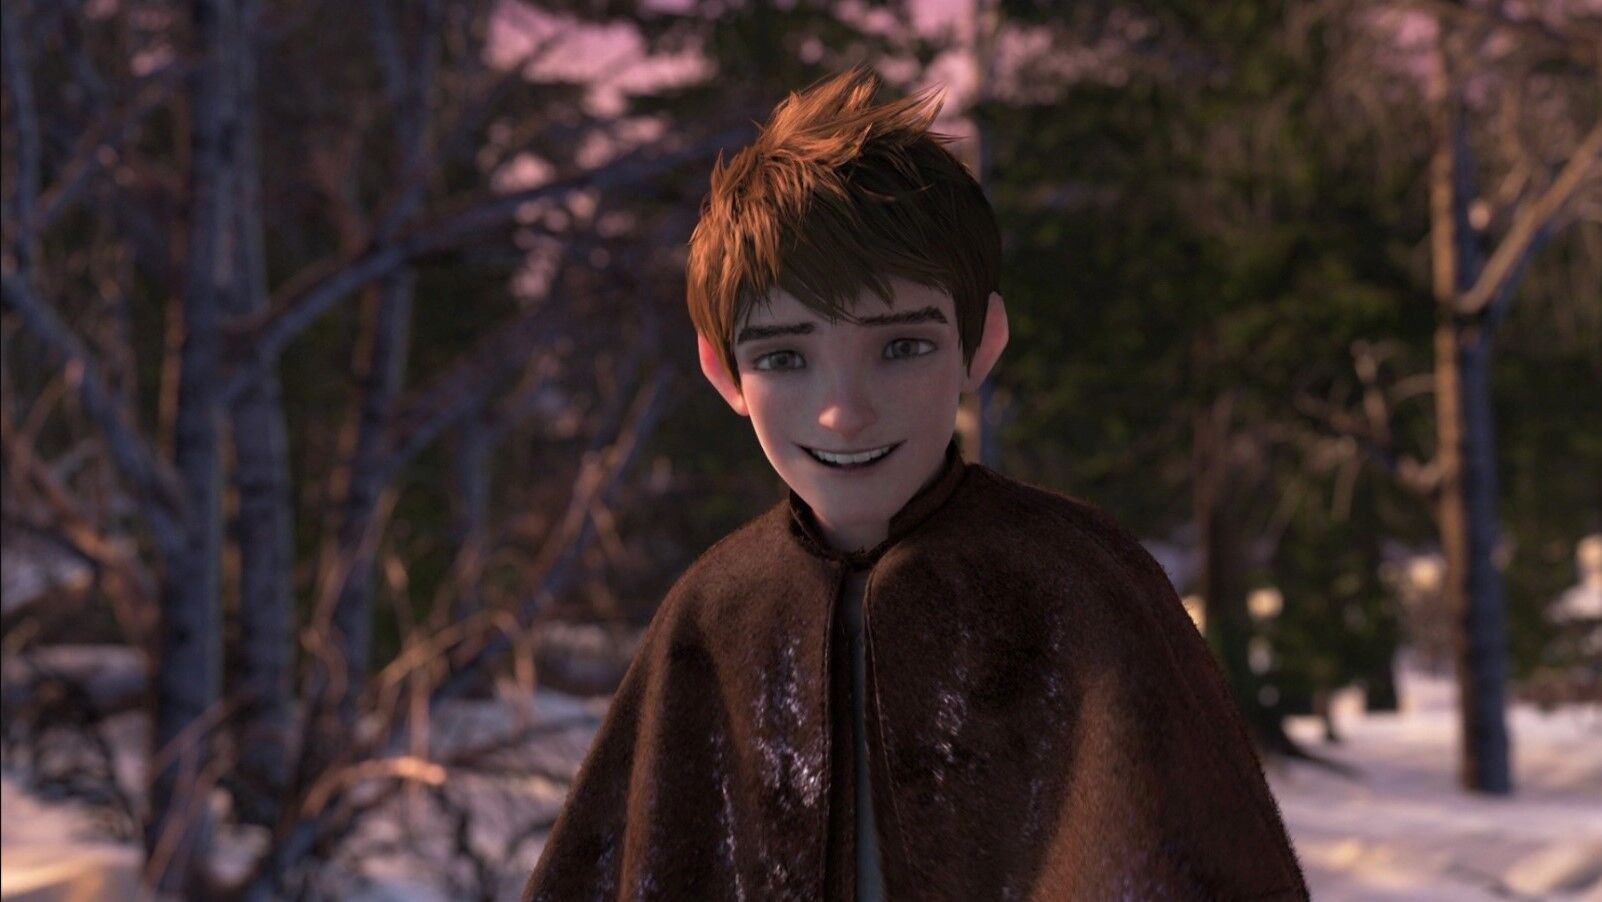 jack frost rise of the guardians human